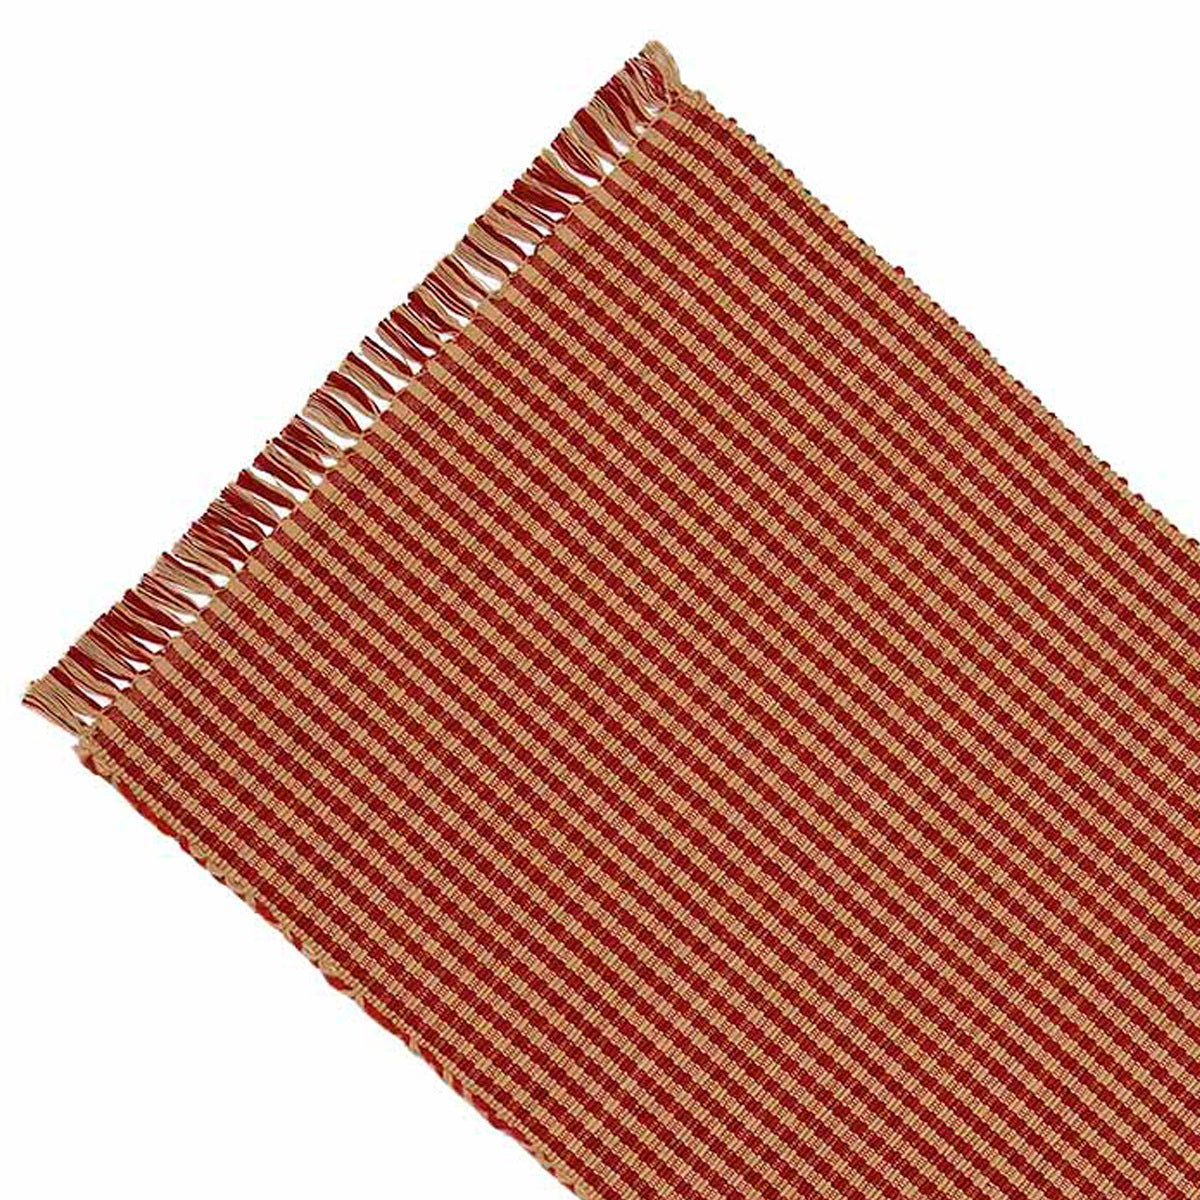 Barn Red Oat Newbury Gingham Placemat Set Of Six - Interiors by Elizabeth